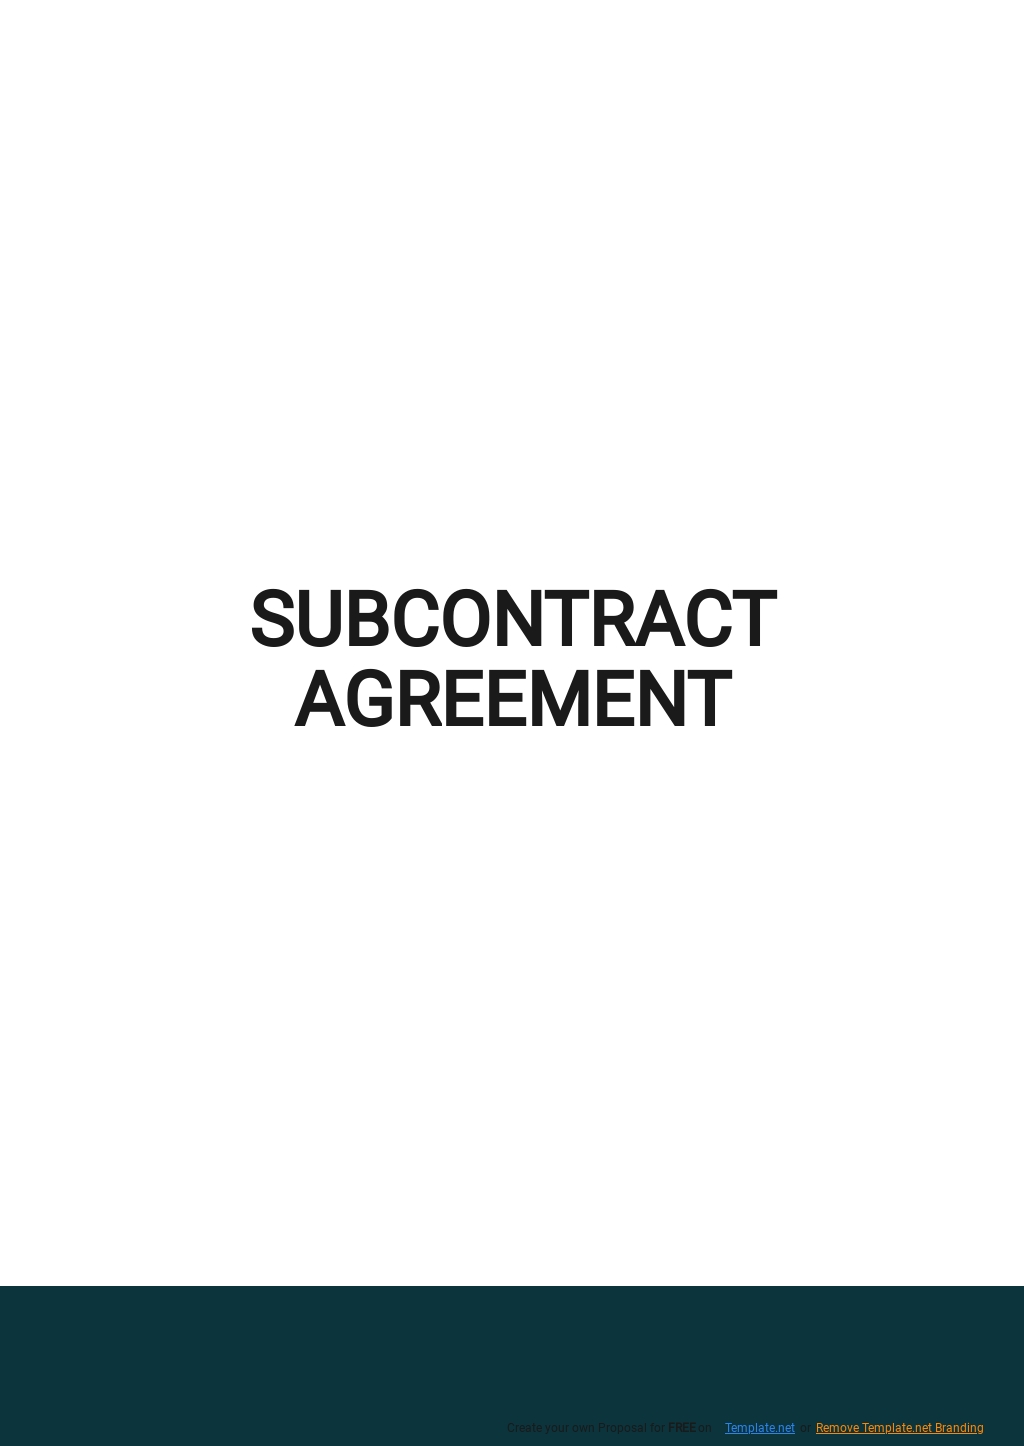 Sample Subcontract Agreement Template.jpe